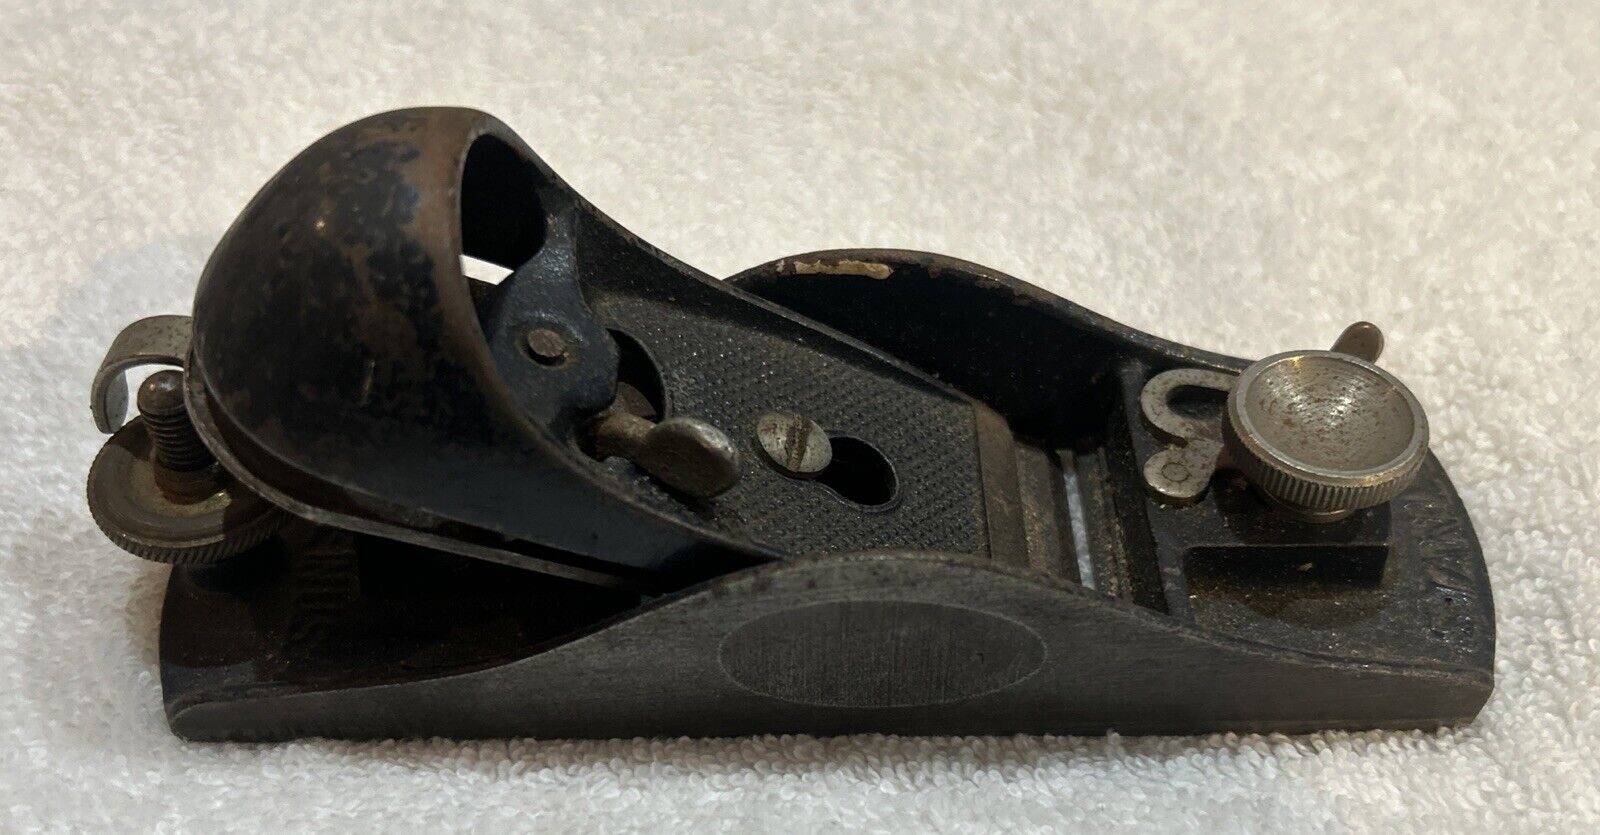 Vintage Stanley no 9 1/2 block plane - made in USA